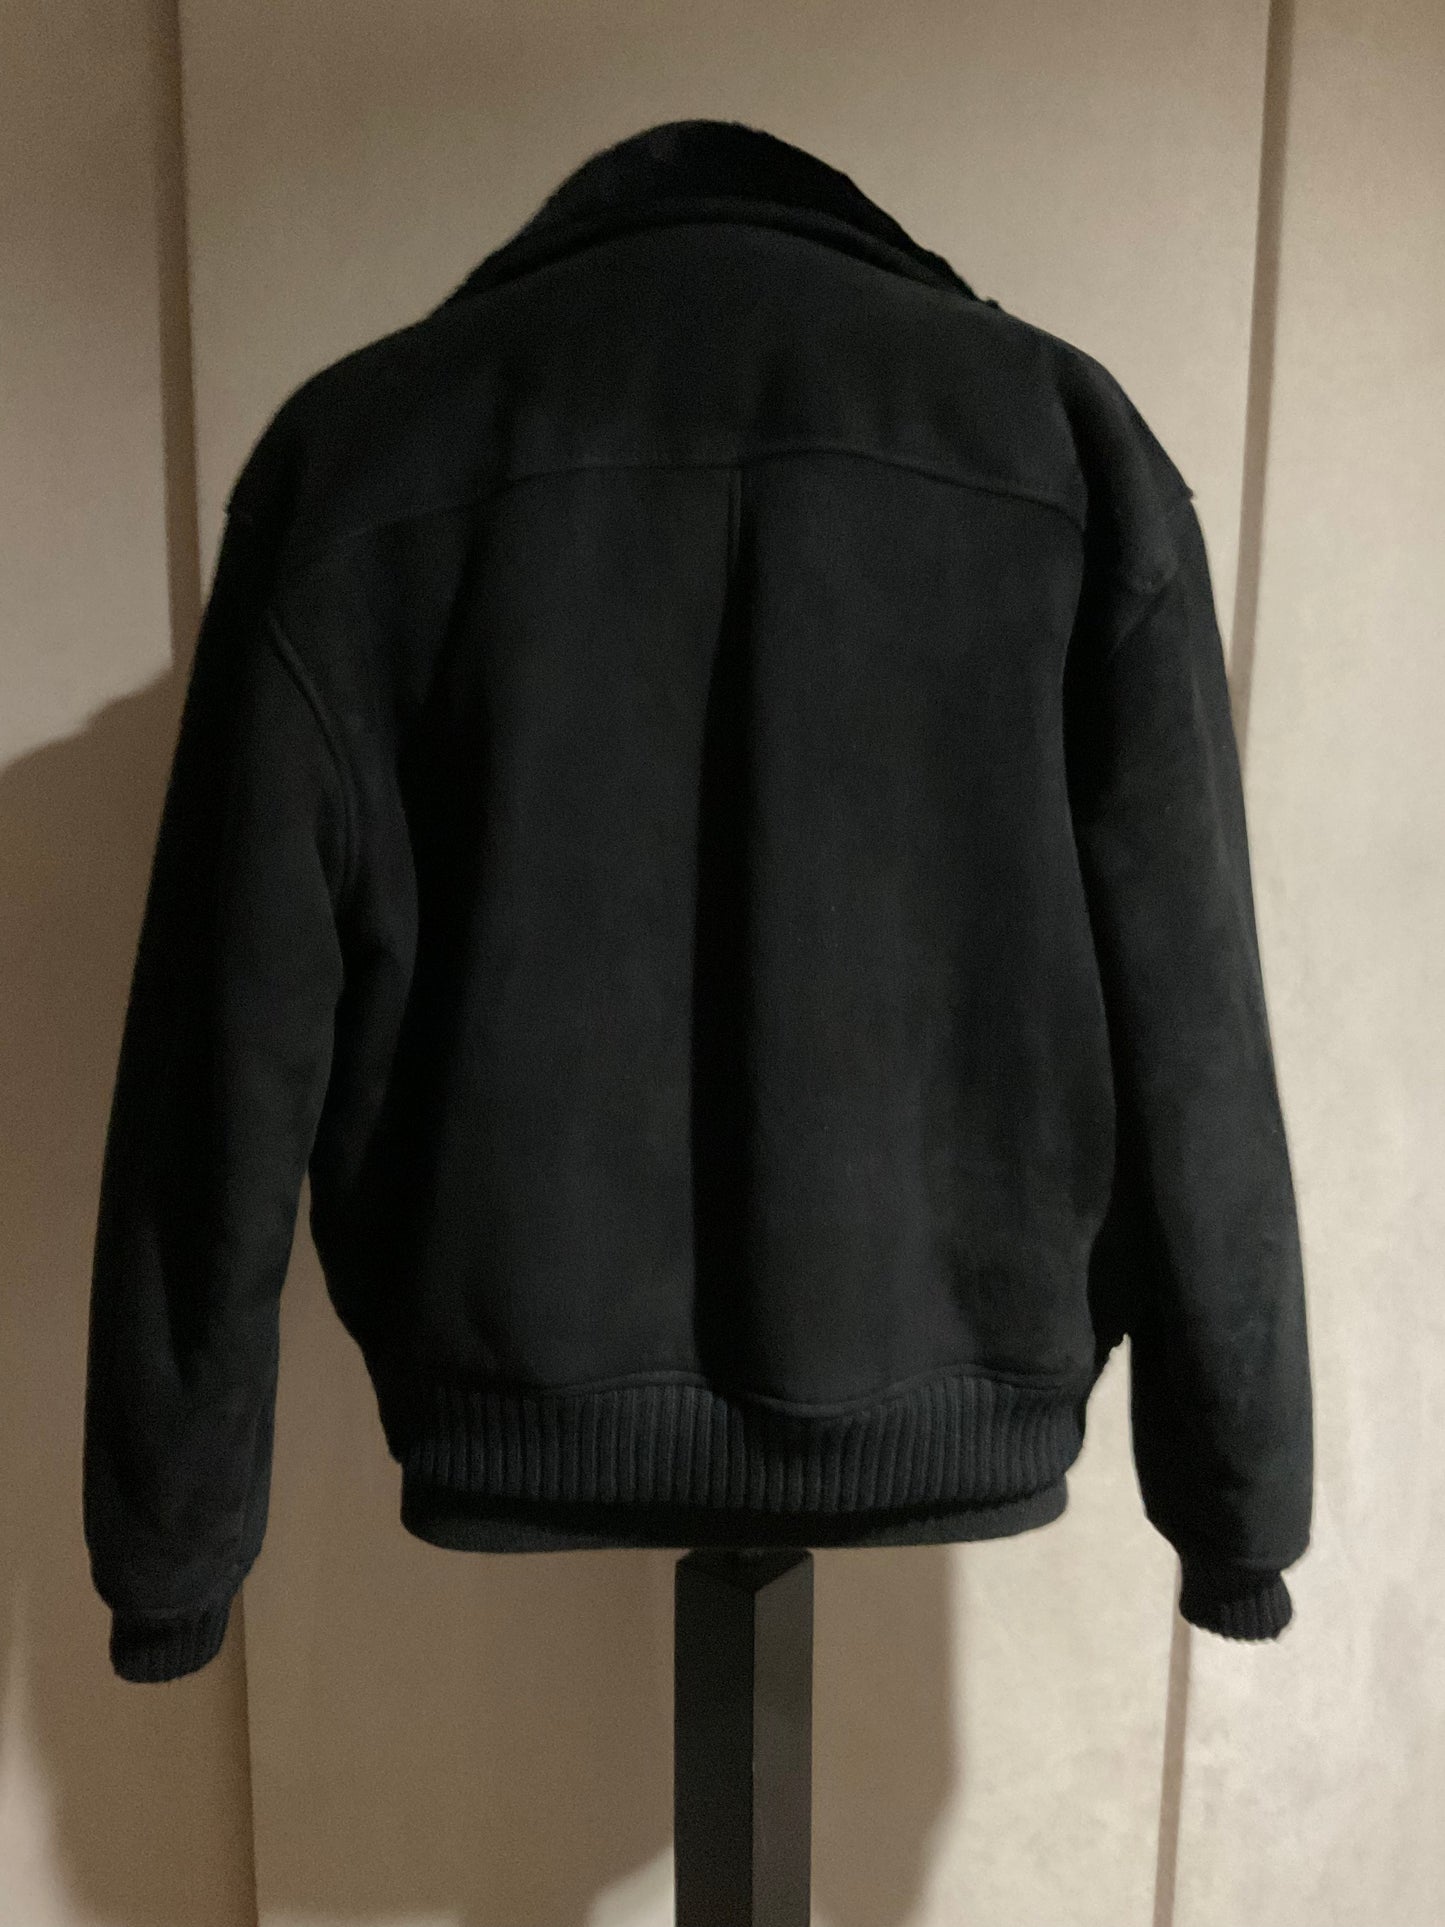 R P COAT / SHEARLING & KNIT / BLACK / NEW / MEDIUM - LARGE / MADE IN ITALY